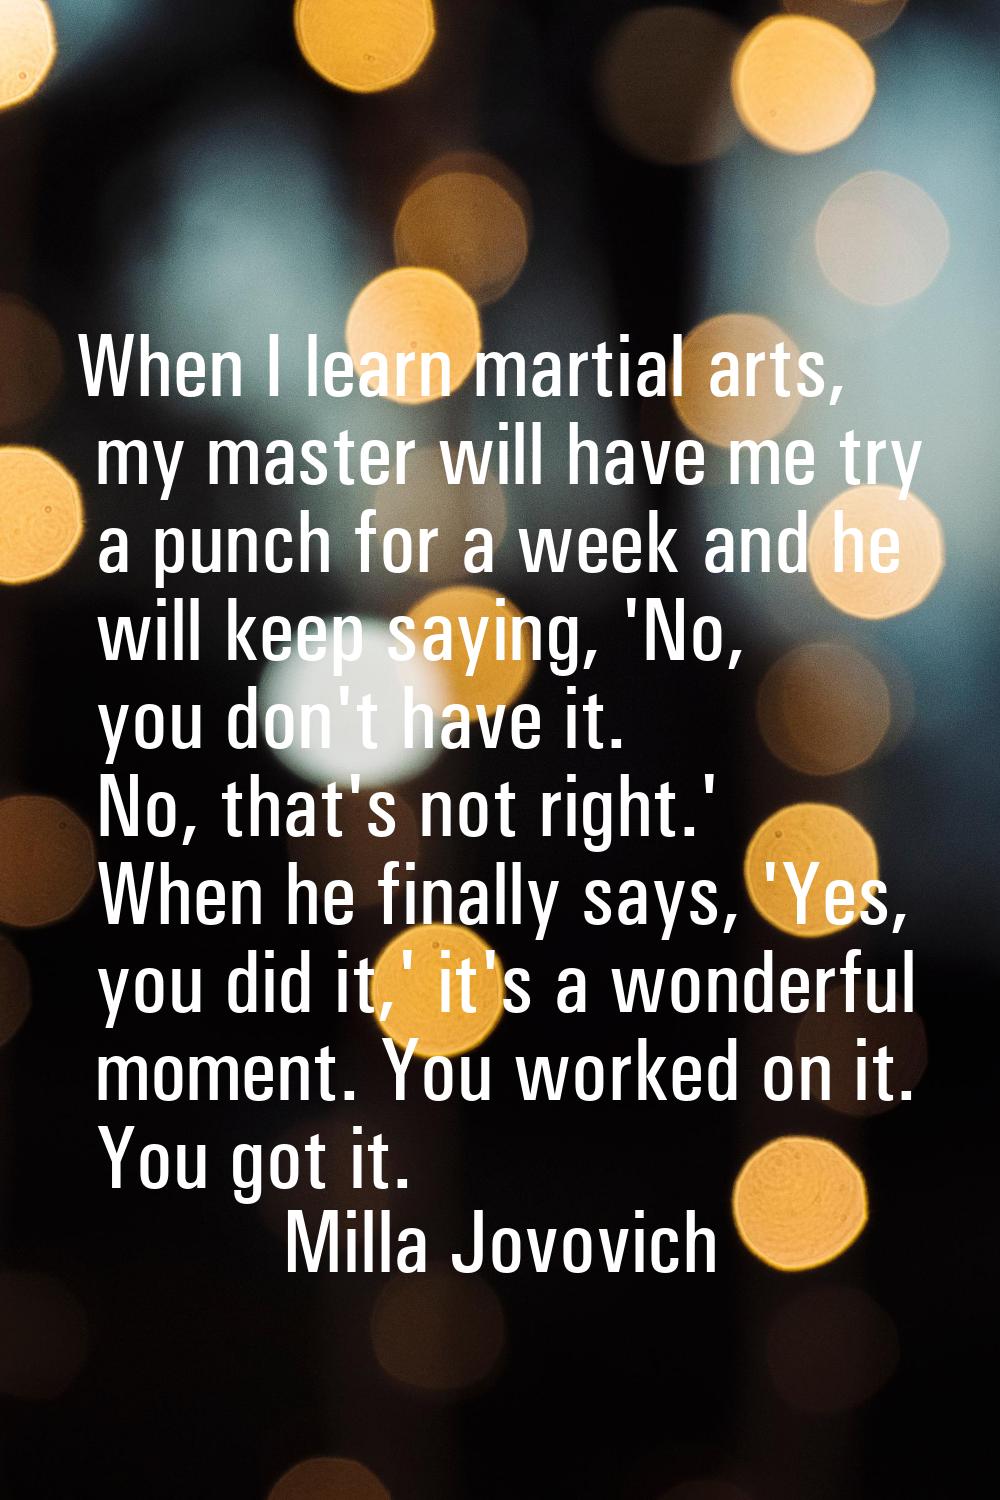 When I learn martial arts, my master will have me try a punch for a week and he will keep saying, '